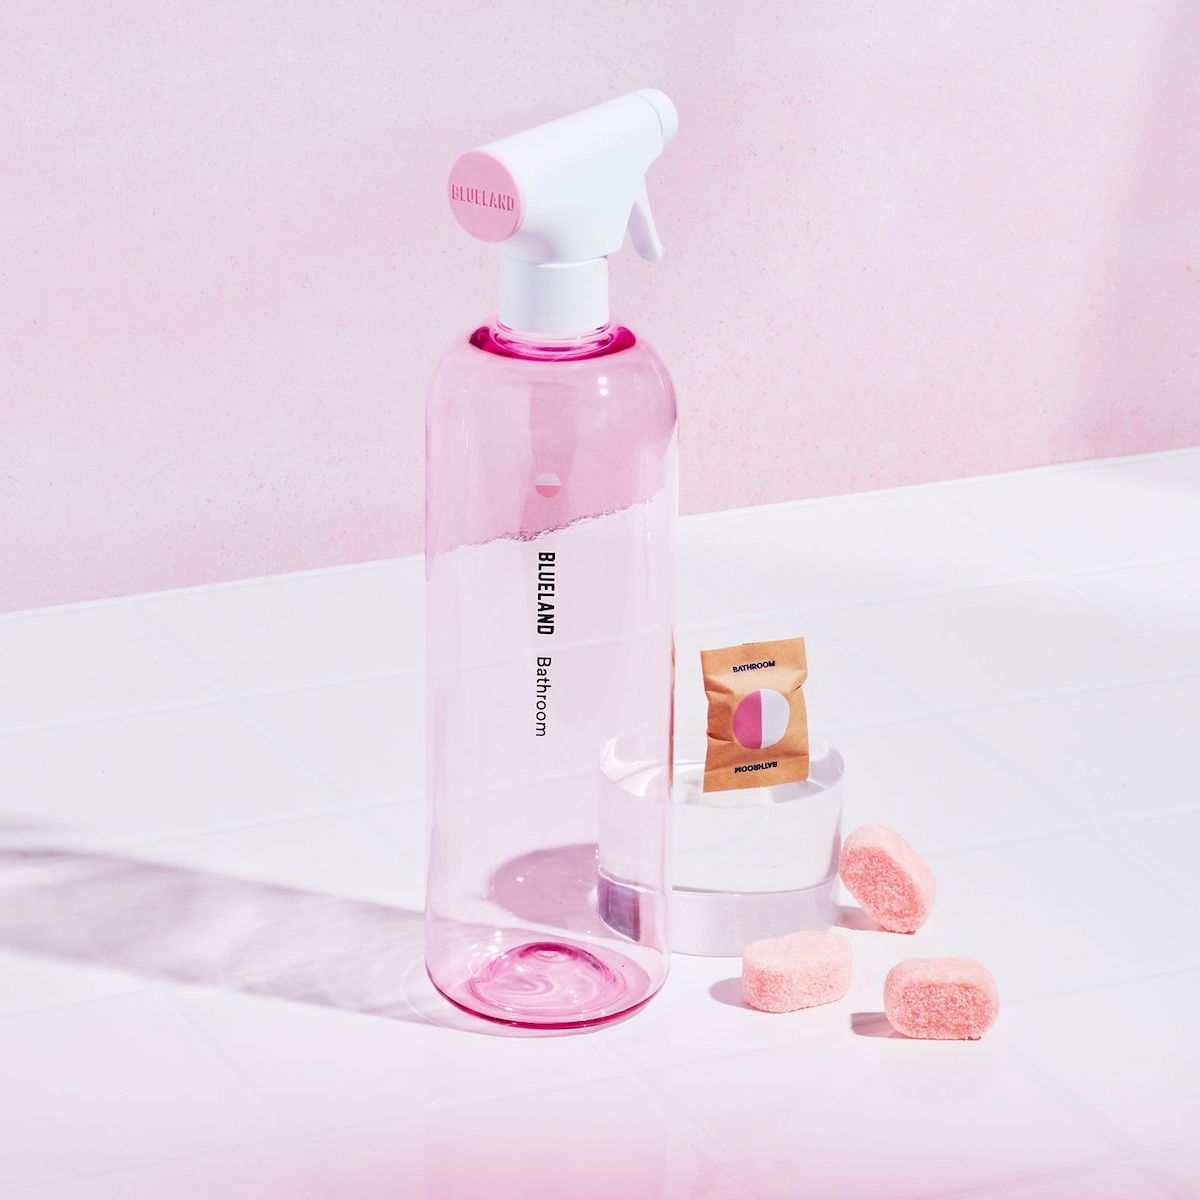 Blueland spray bottle and tablets on a counter with a pink background.